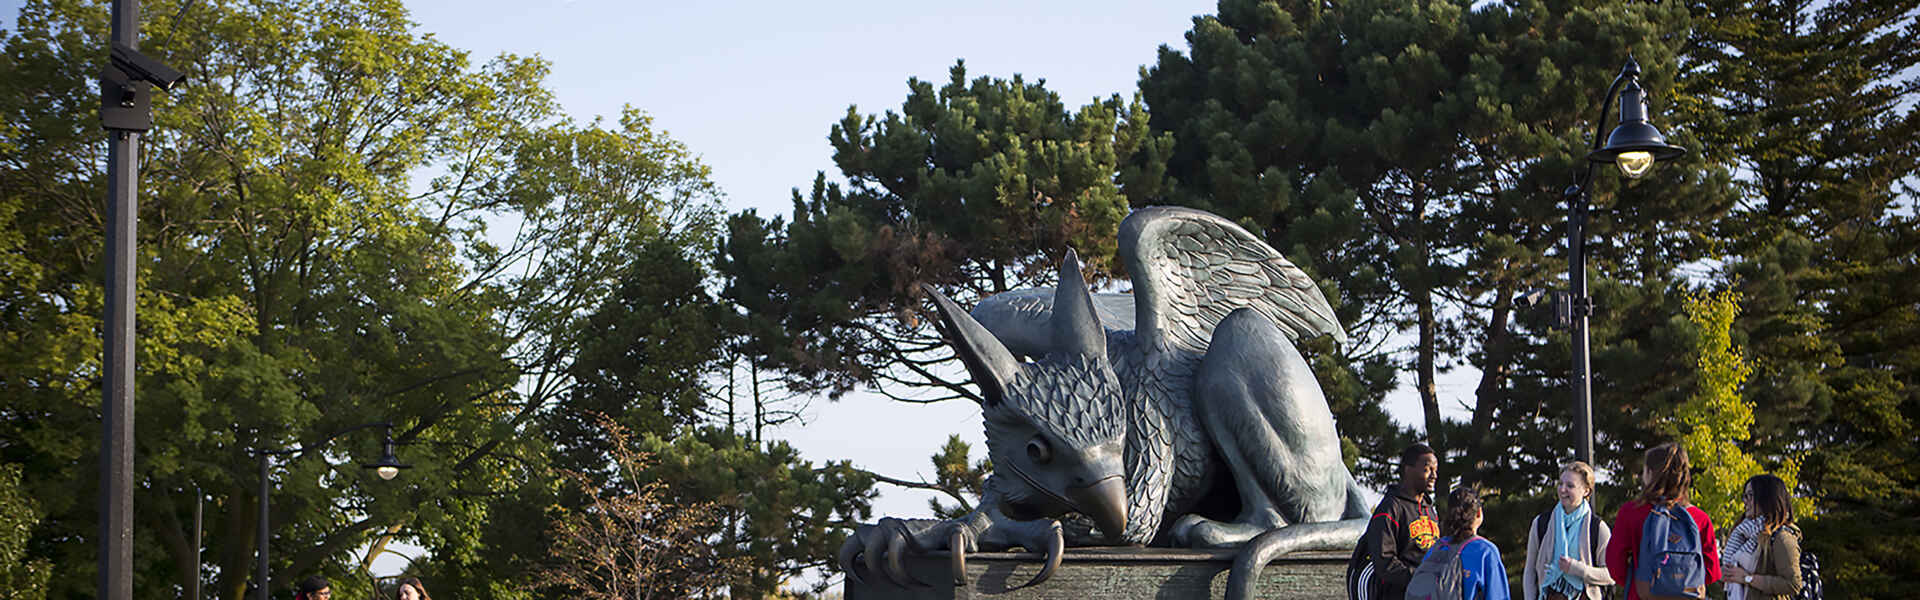 A group of students chat while standing by the Gryphon statue on a sunny day.